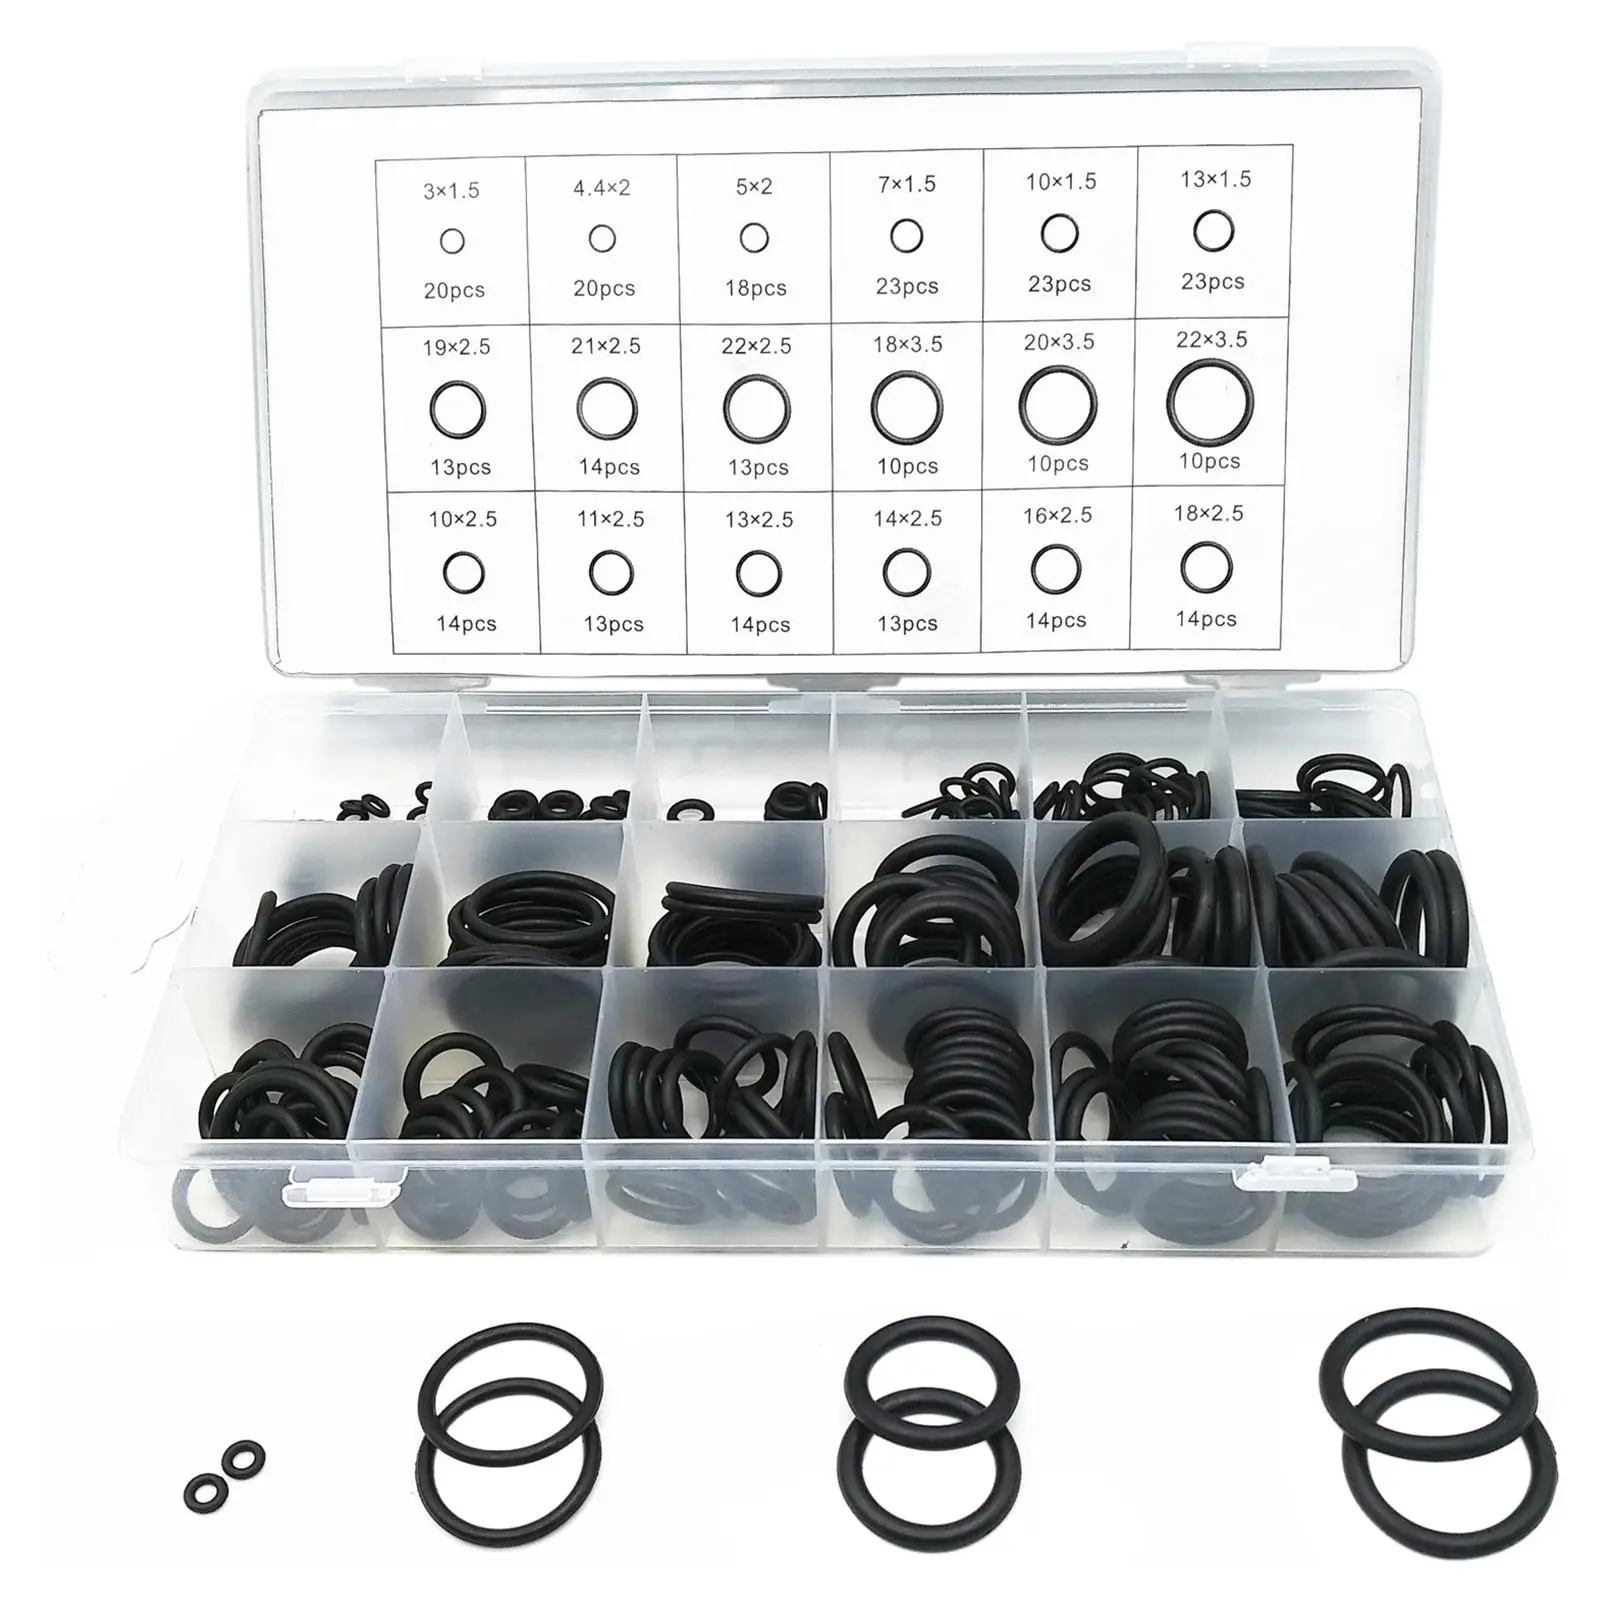 

279Pcs Rubber O Ring Assortment Kit 18 Different Sizes Black Small Insulation Gasket Washer Seals Round Fits for Vehicle Repair